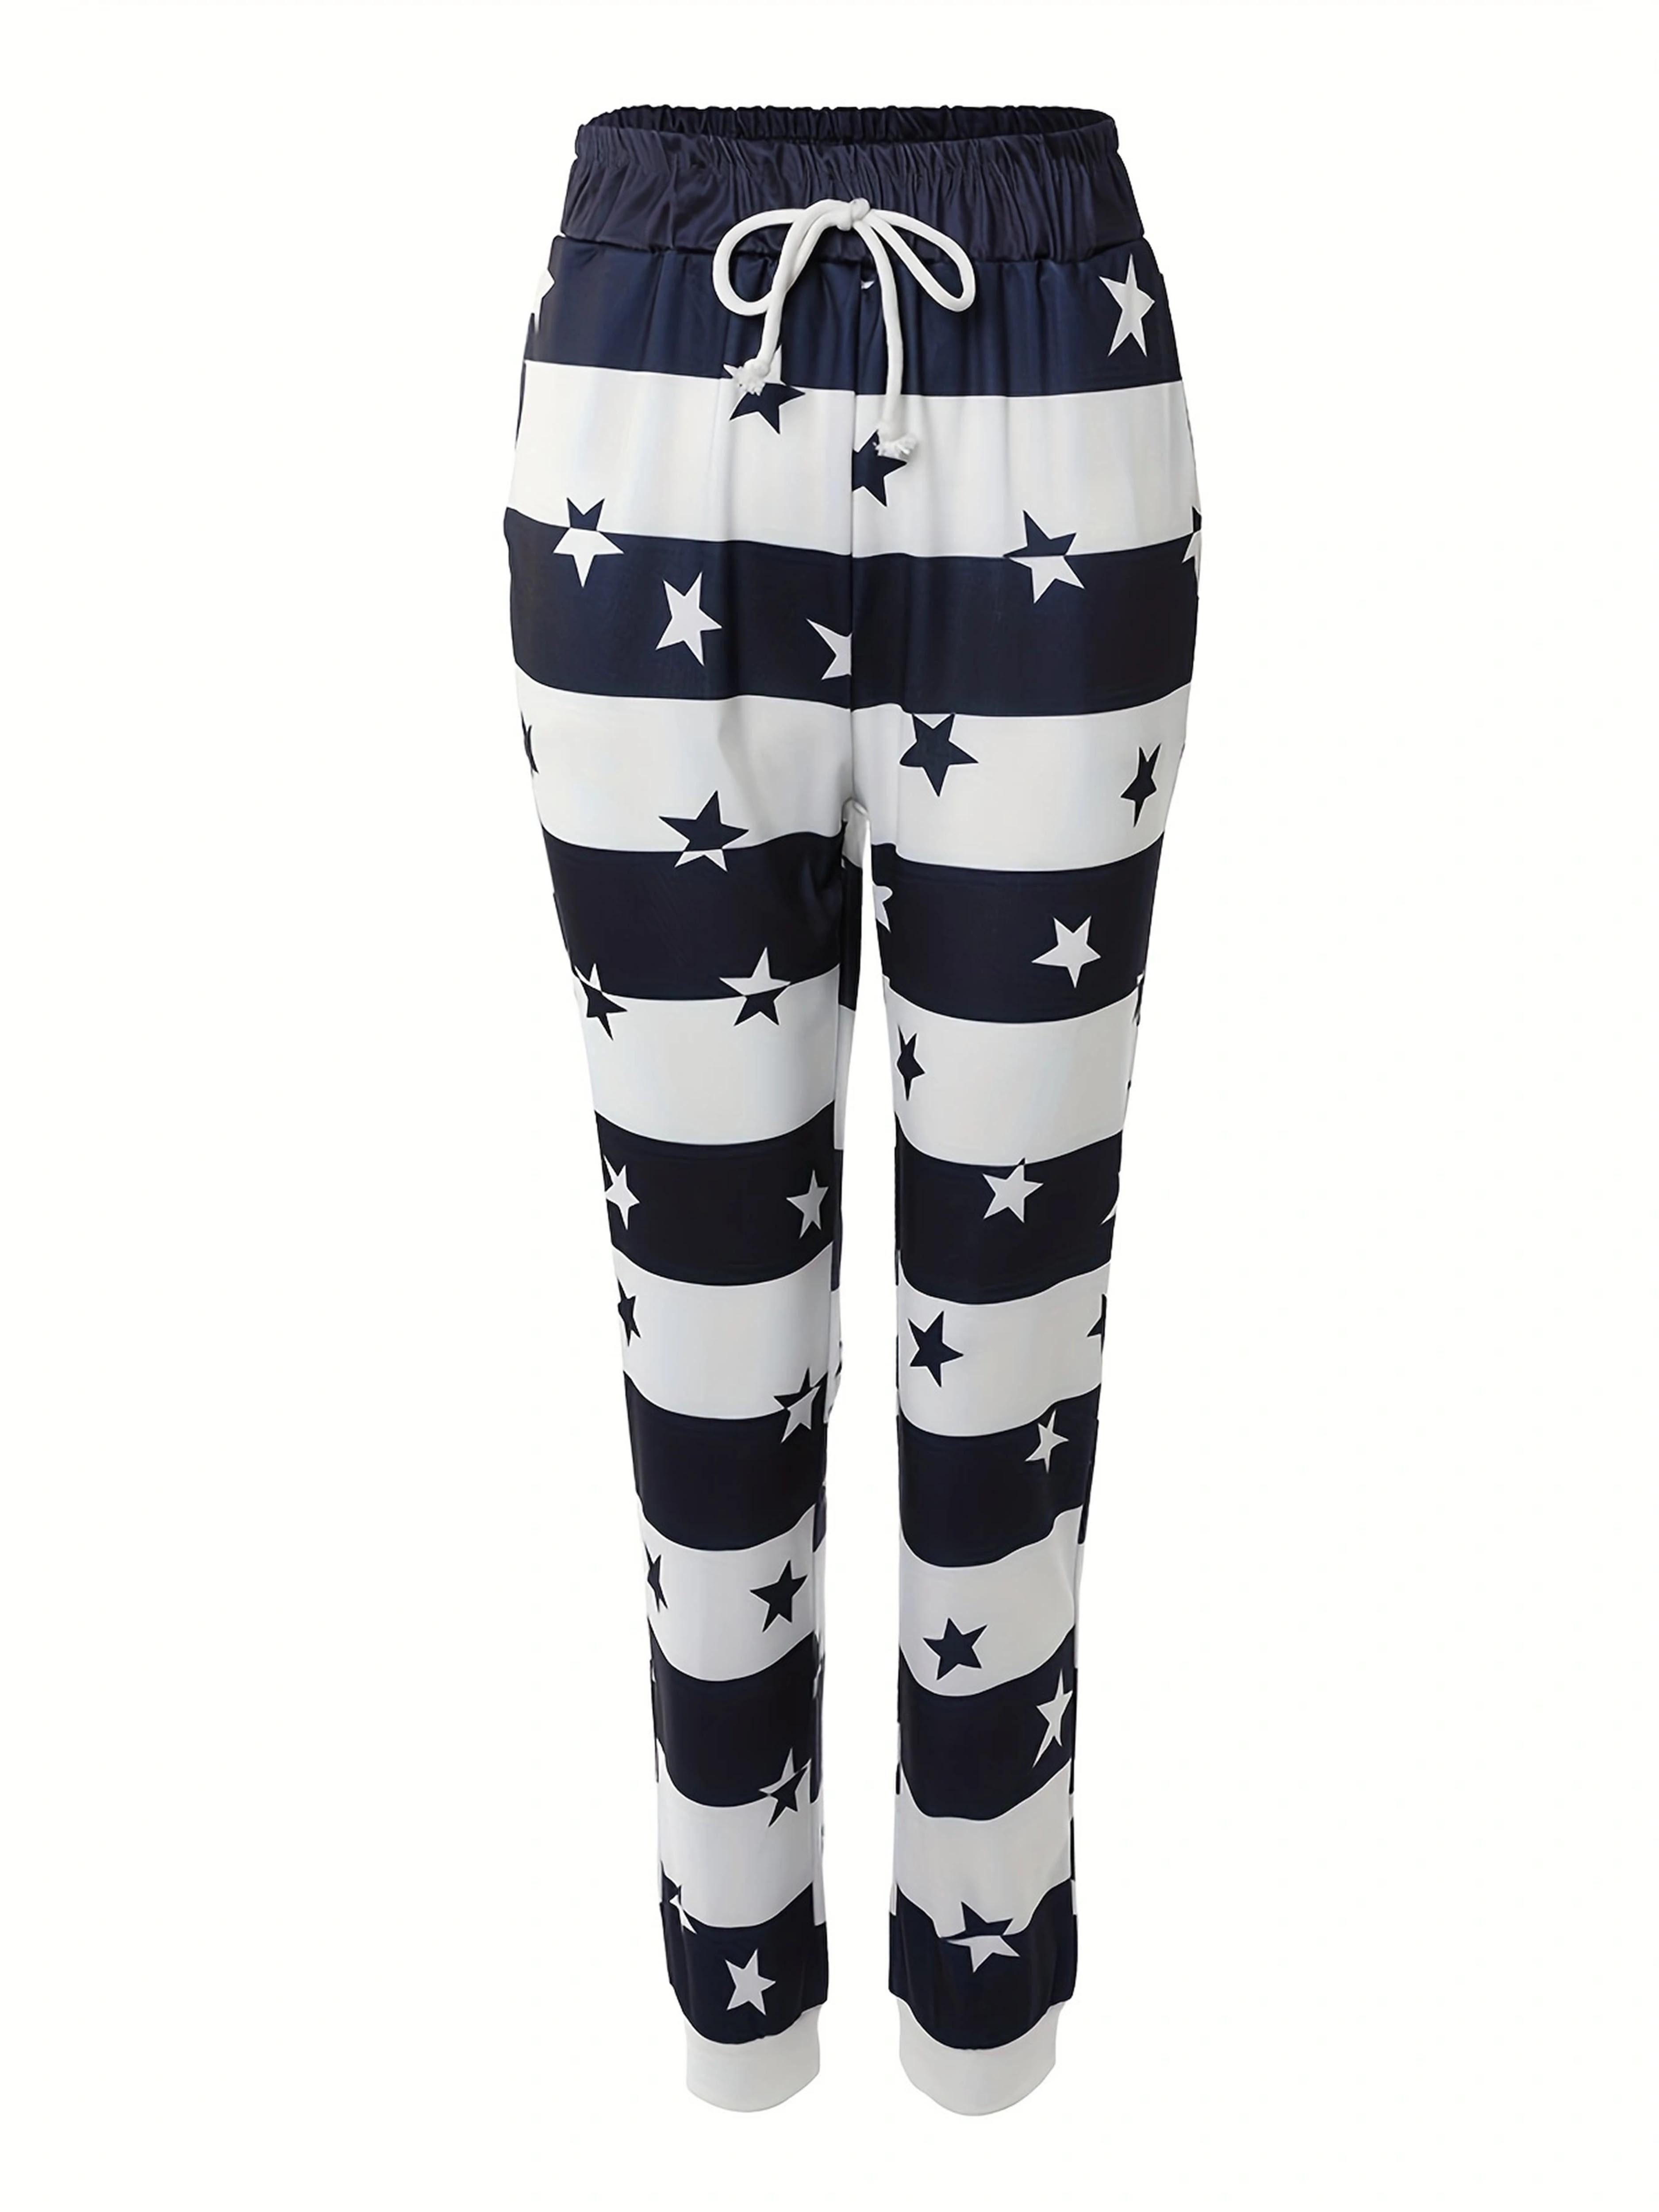 striped star print drawstring pants casual pants for spring summer womens clothing details 0